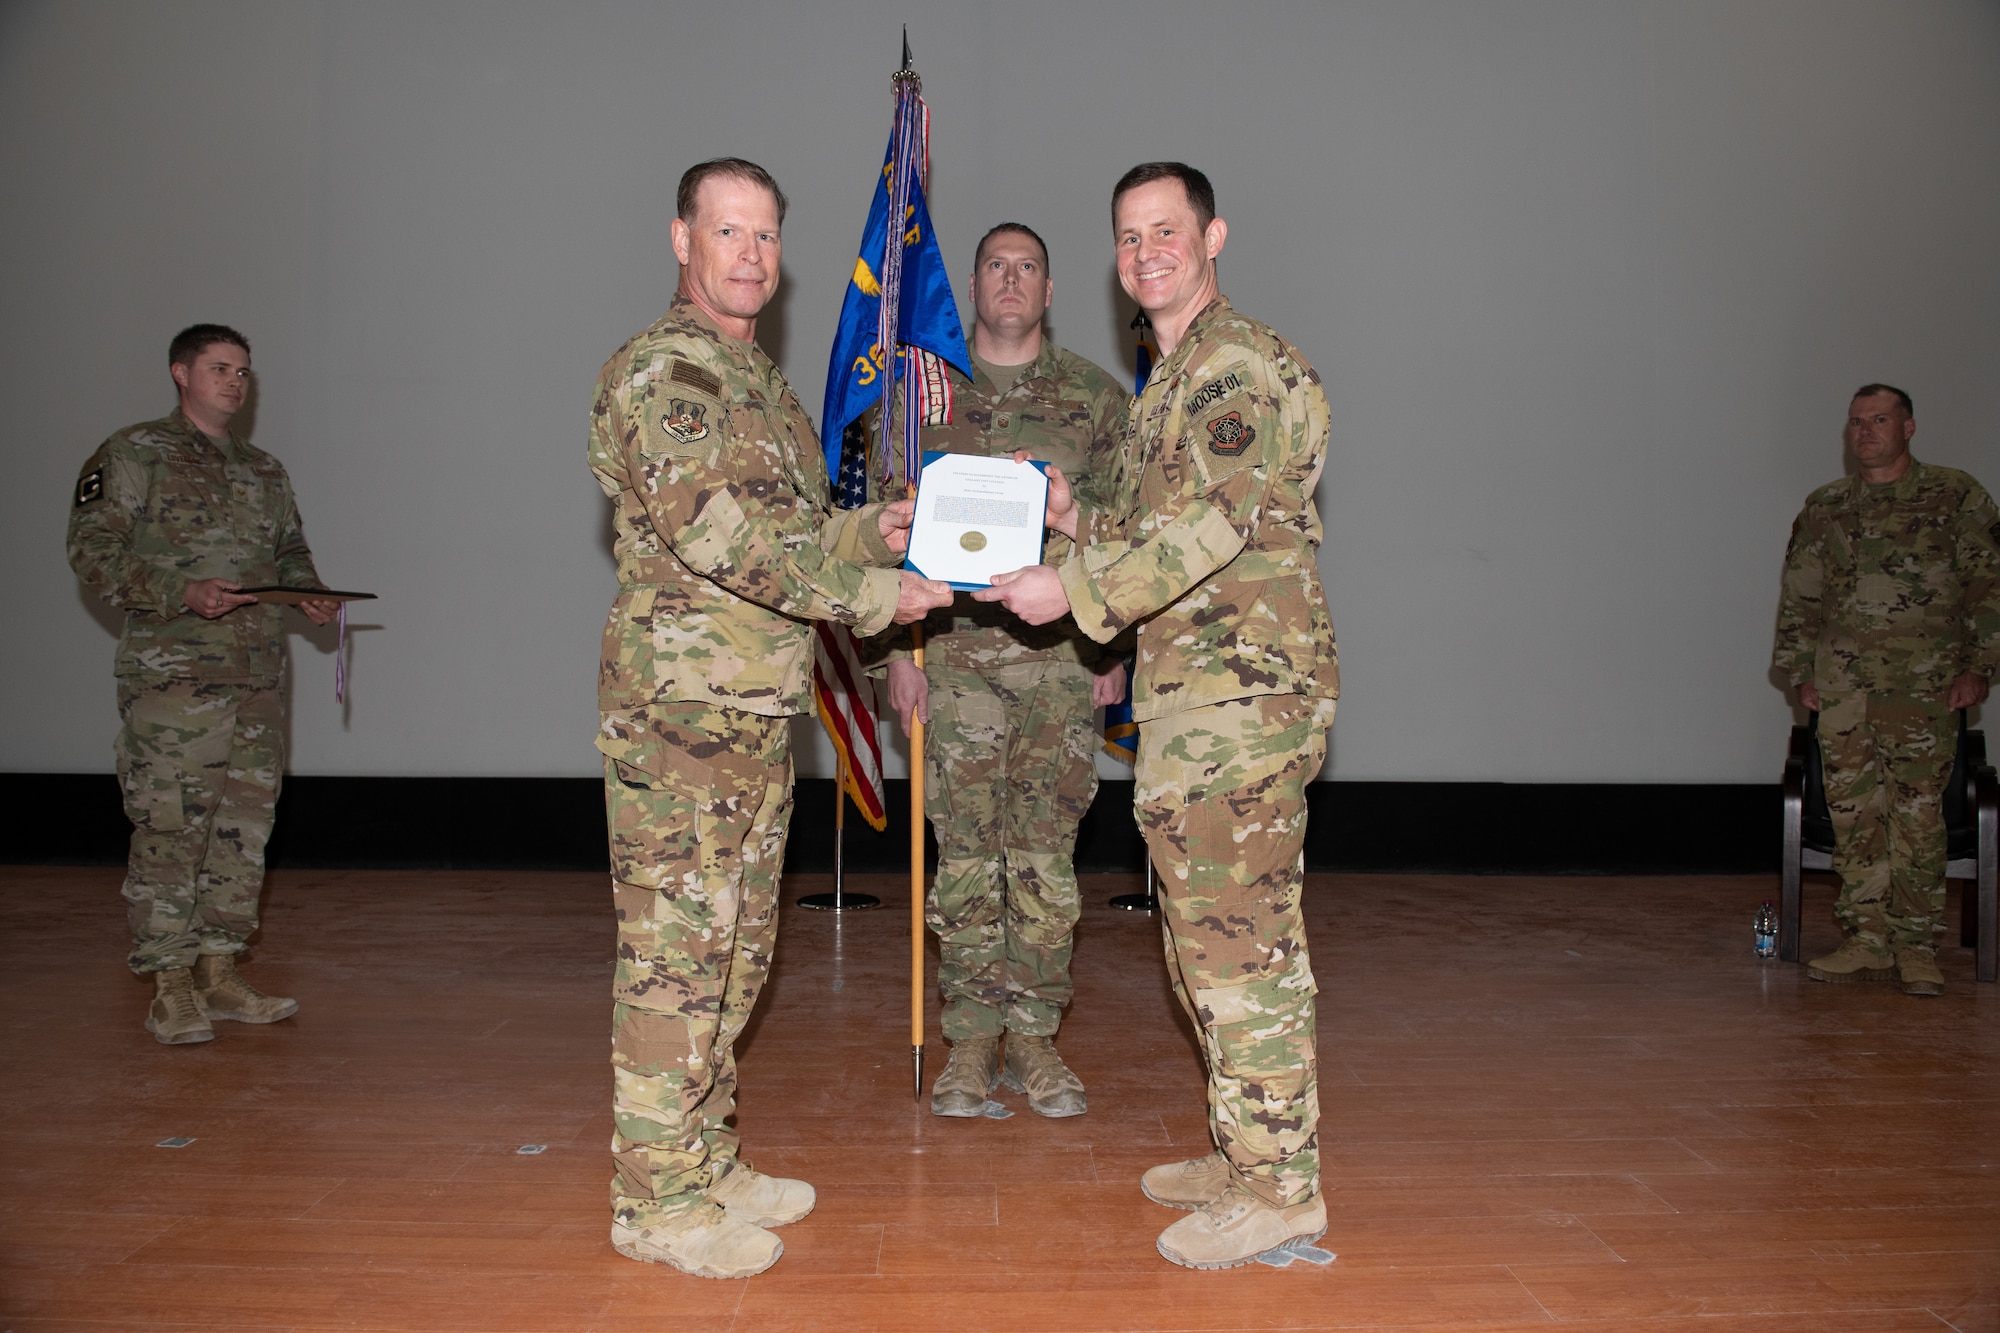 U.S. Air Force Maj. Gen. David Meyer awards the Gallant Unit Citation to U.S. Air Force Lt. Col. Patrick McLaughlin on behalf of the 385th Air Expeditionary Group during an award ceremony on Al Udeid Air Base, Qatar, May 1, 2022. The GUC has only been awarded five times in its history.